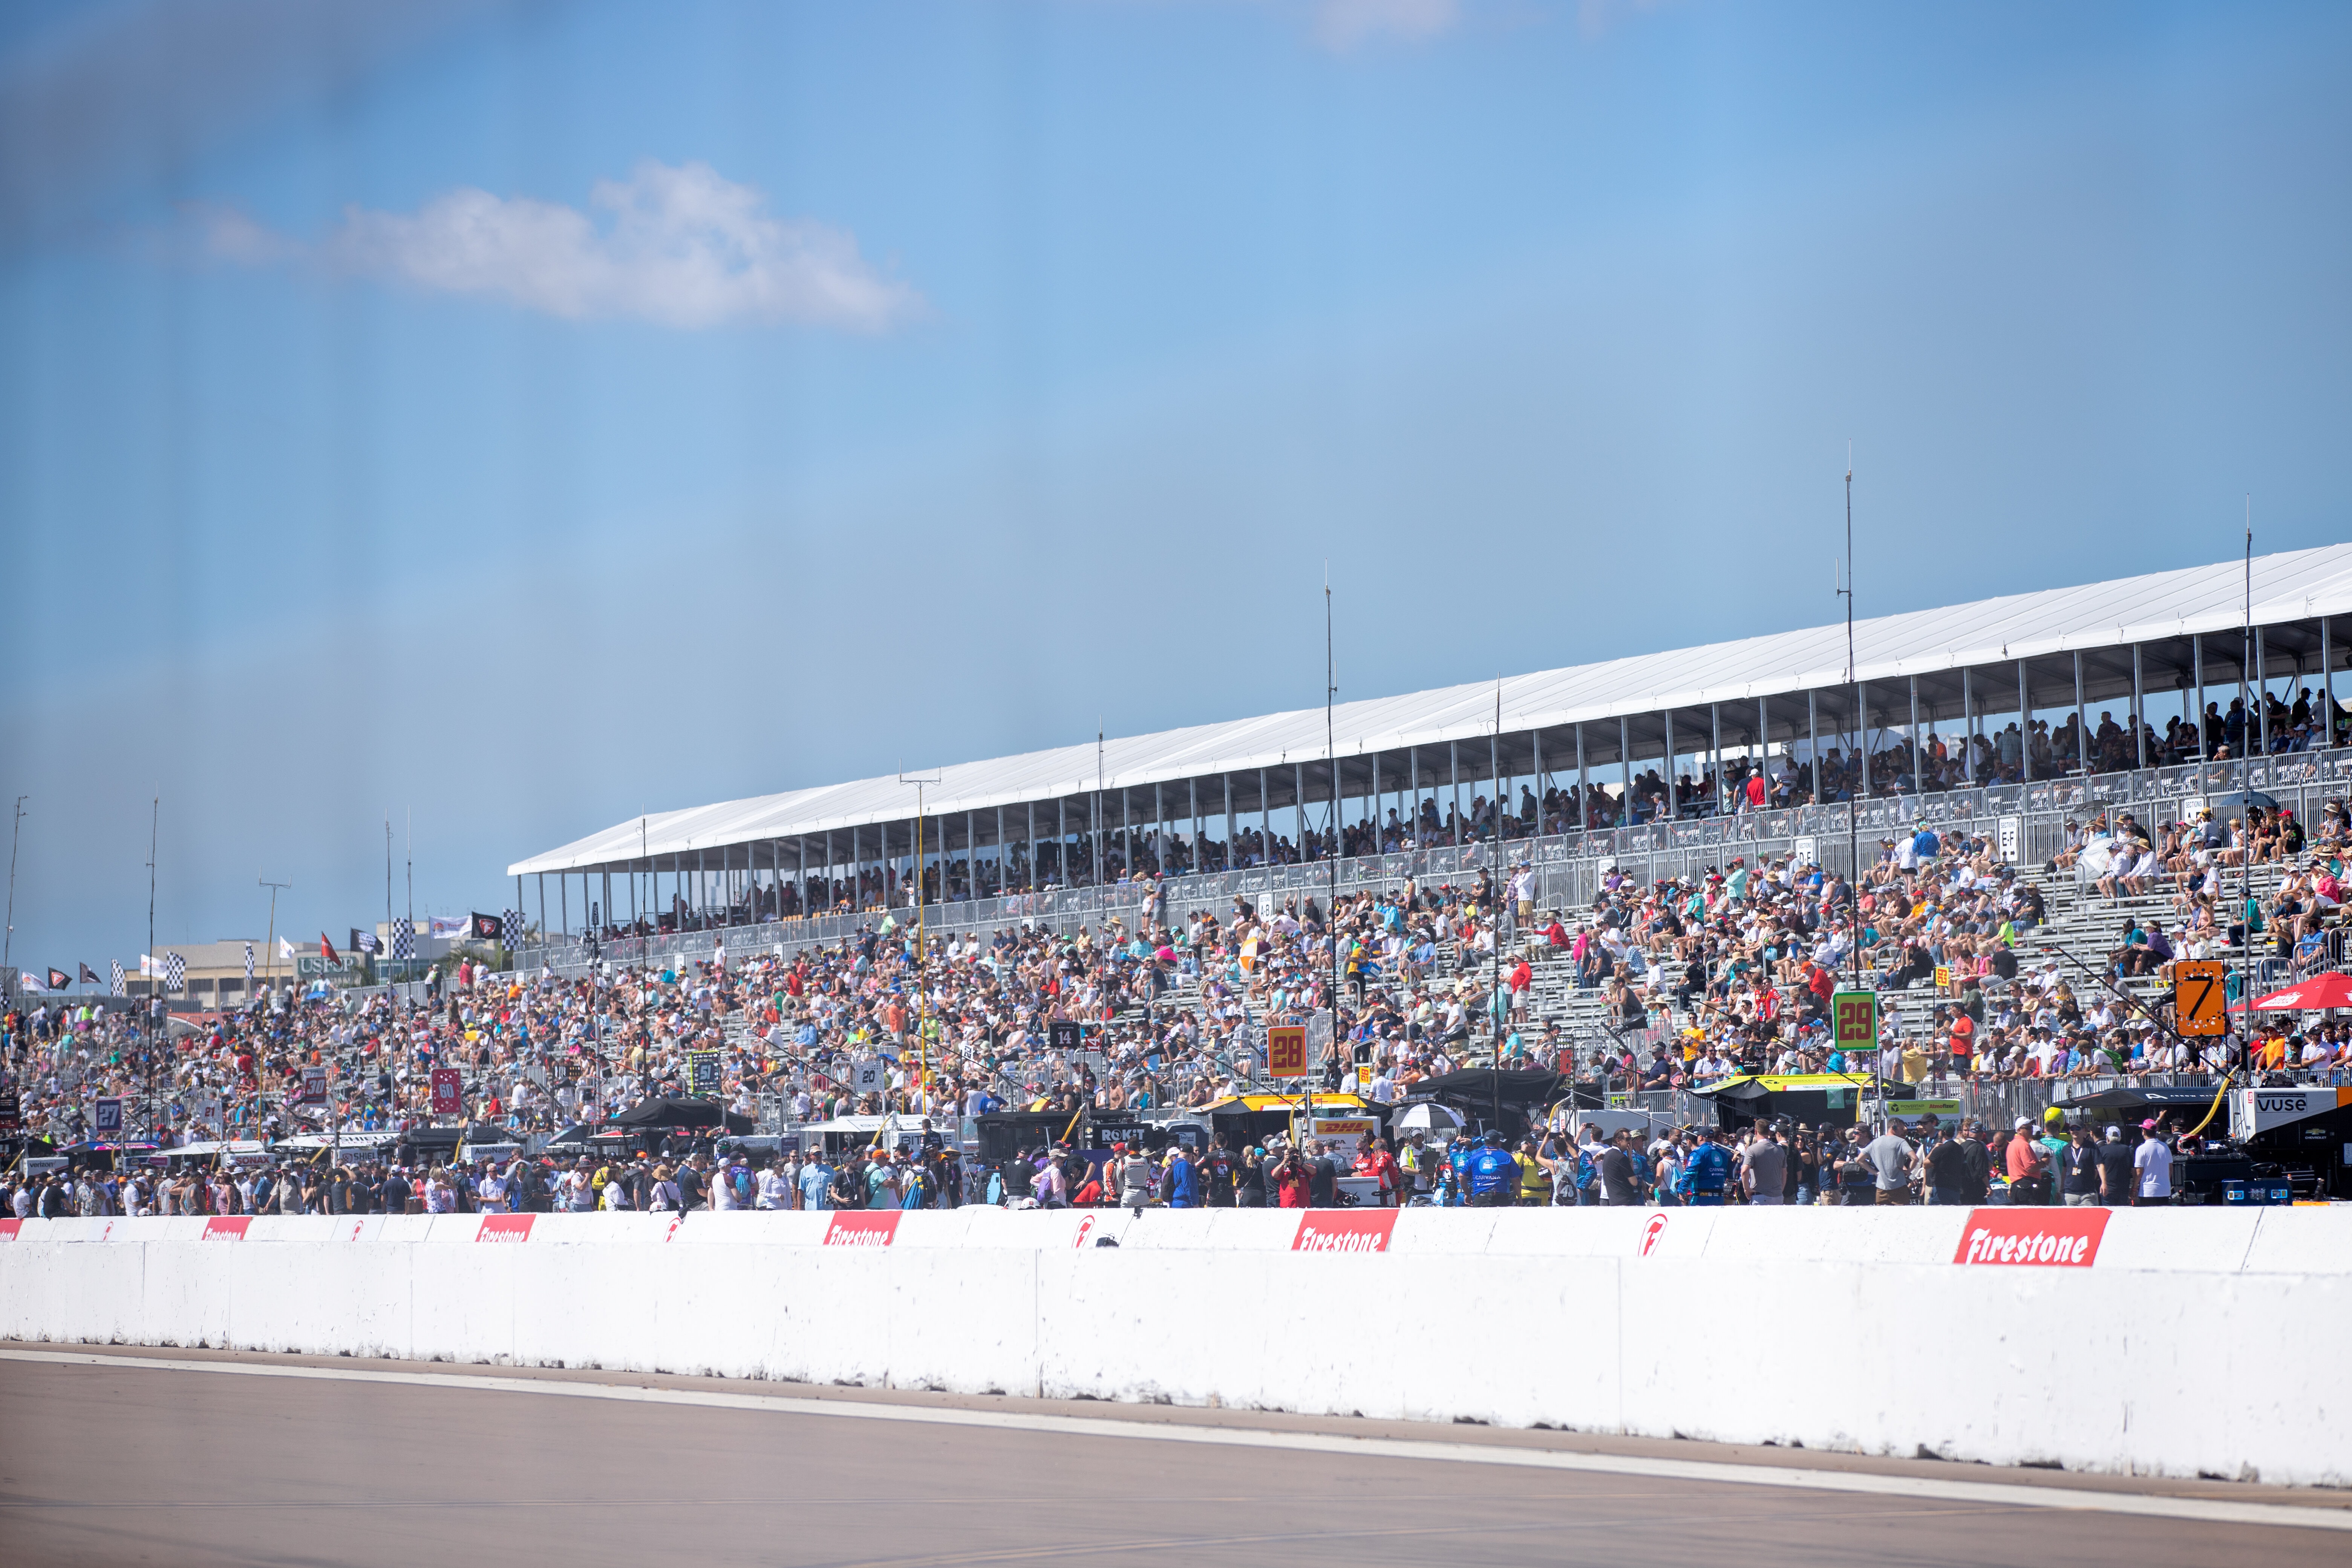 Single Day tickets go on sale today for the Firestone Grand Prix of St. Petersburg presented by RP Funding